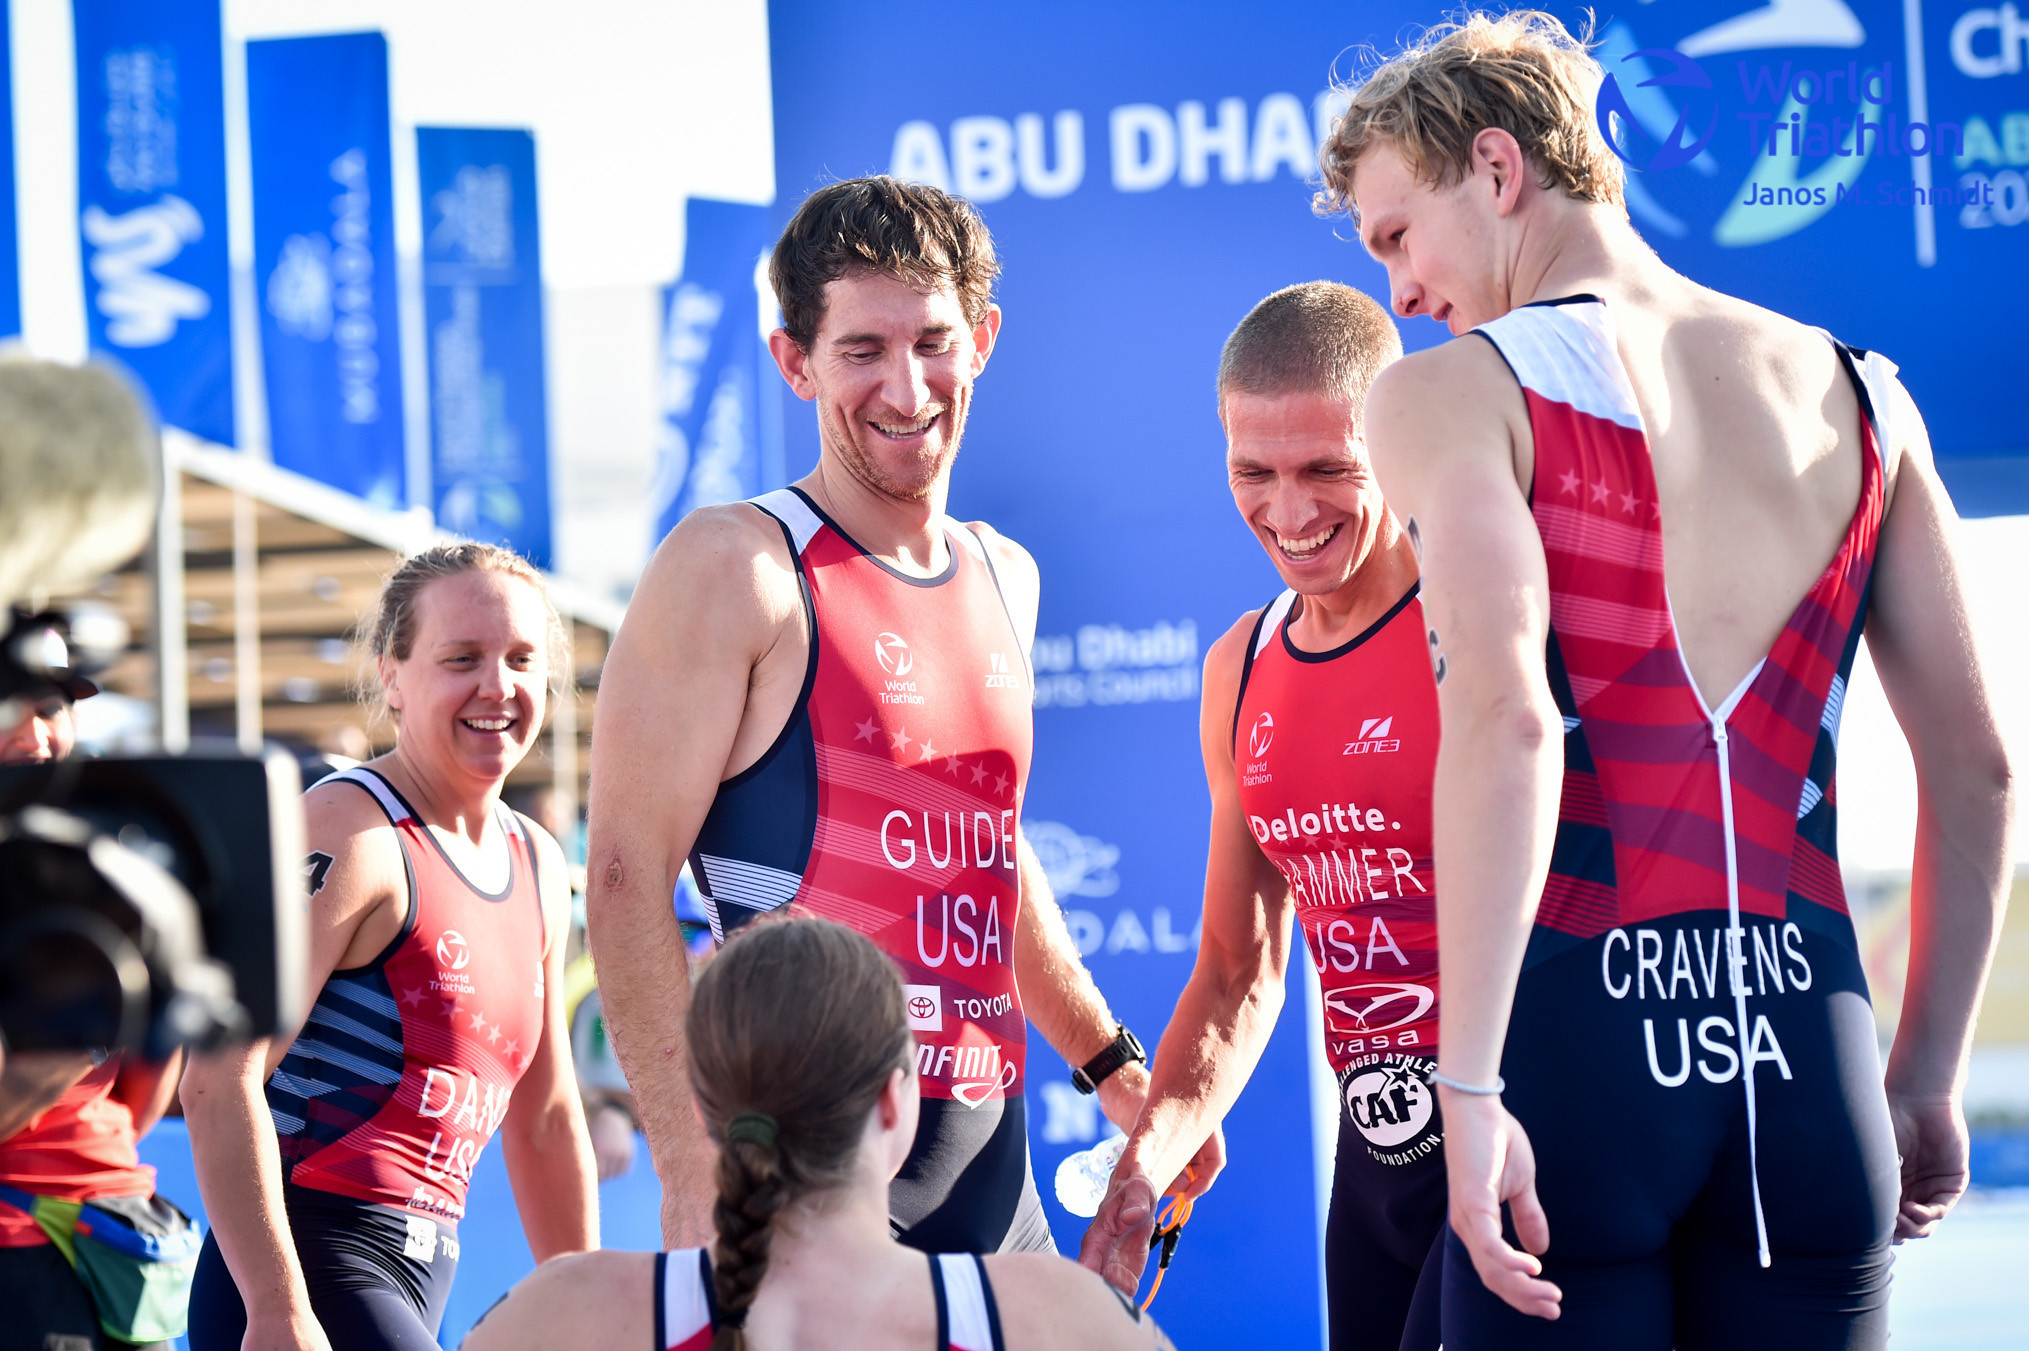 The United States finished second after a fine anchor leg from Chris Hammer, second right ©World Triathlon